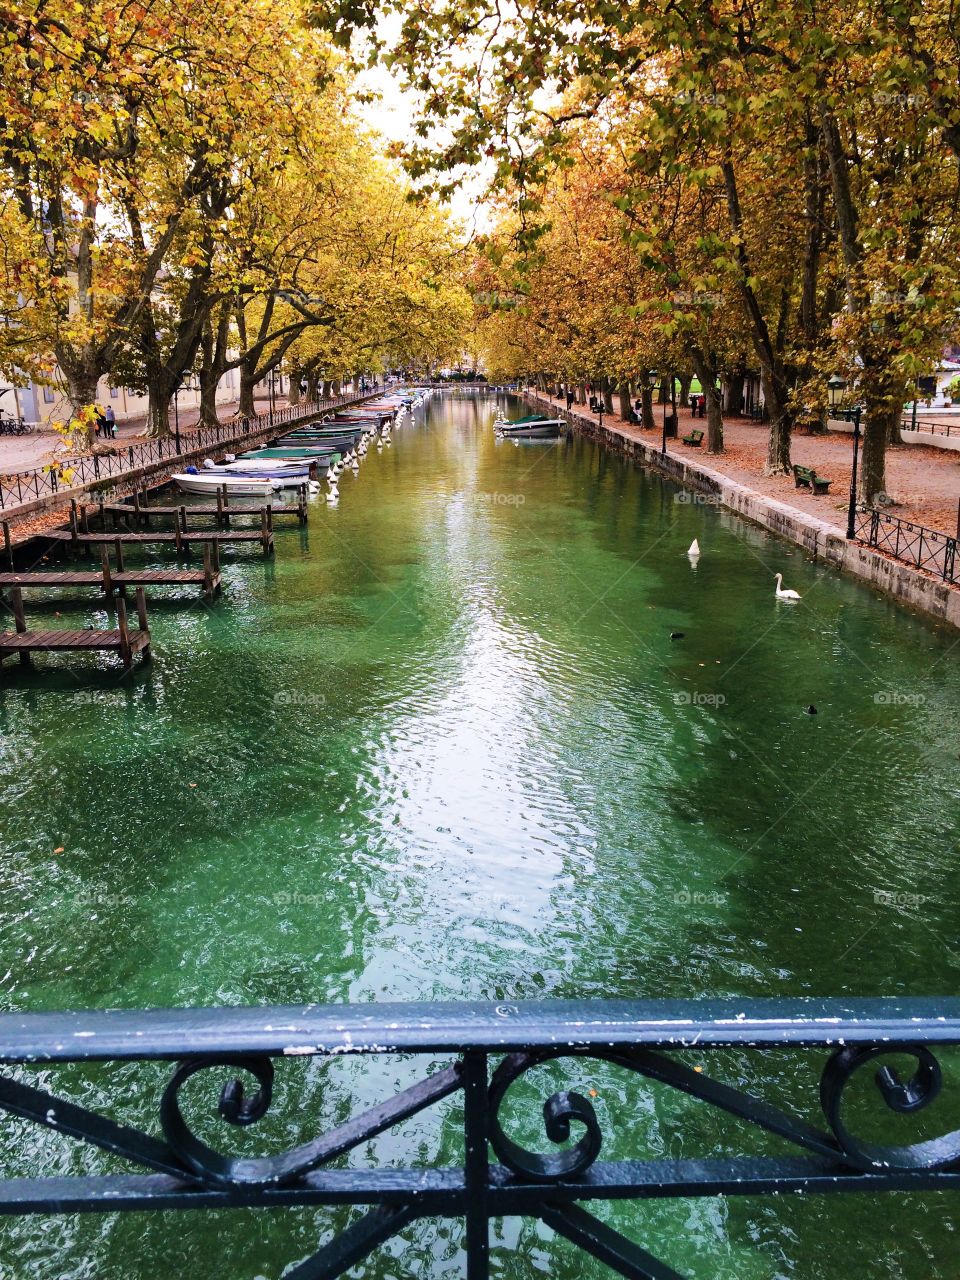 Annecy, French Alps